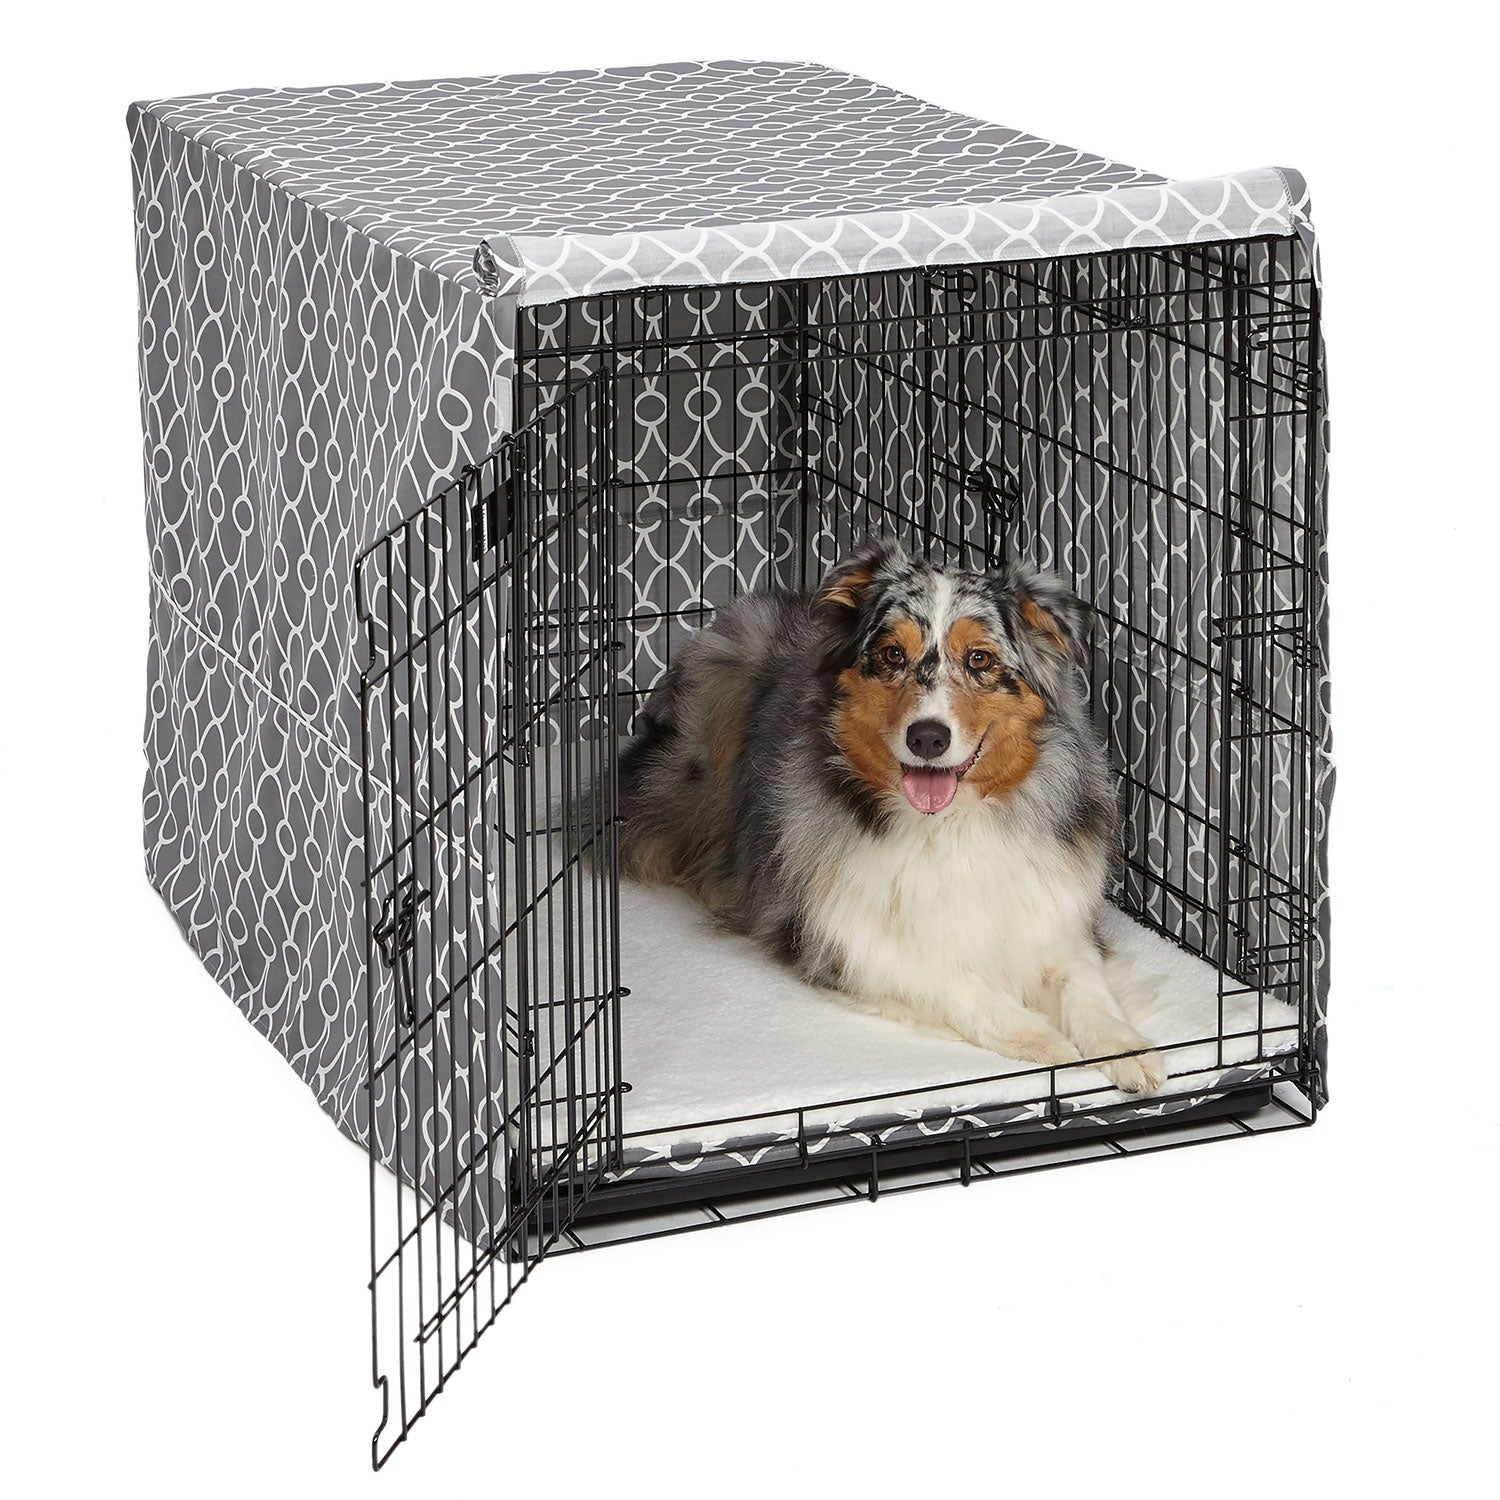 Midwest QuietTime Defender Covella Dog Crate Cover Gray 48" x 30" x 33"